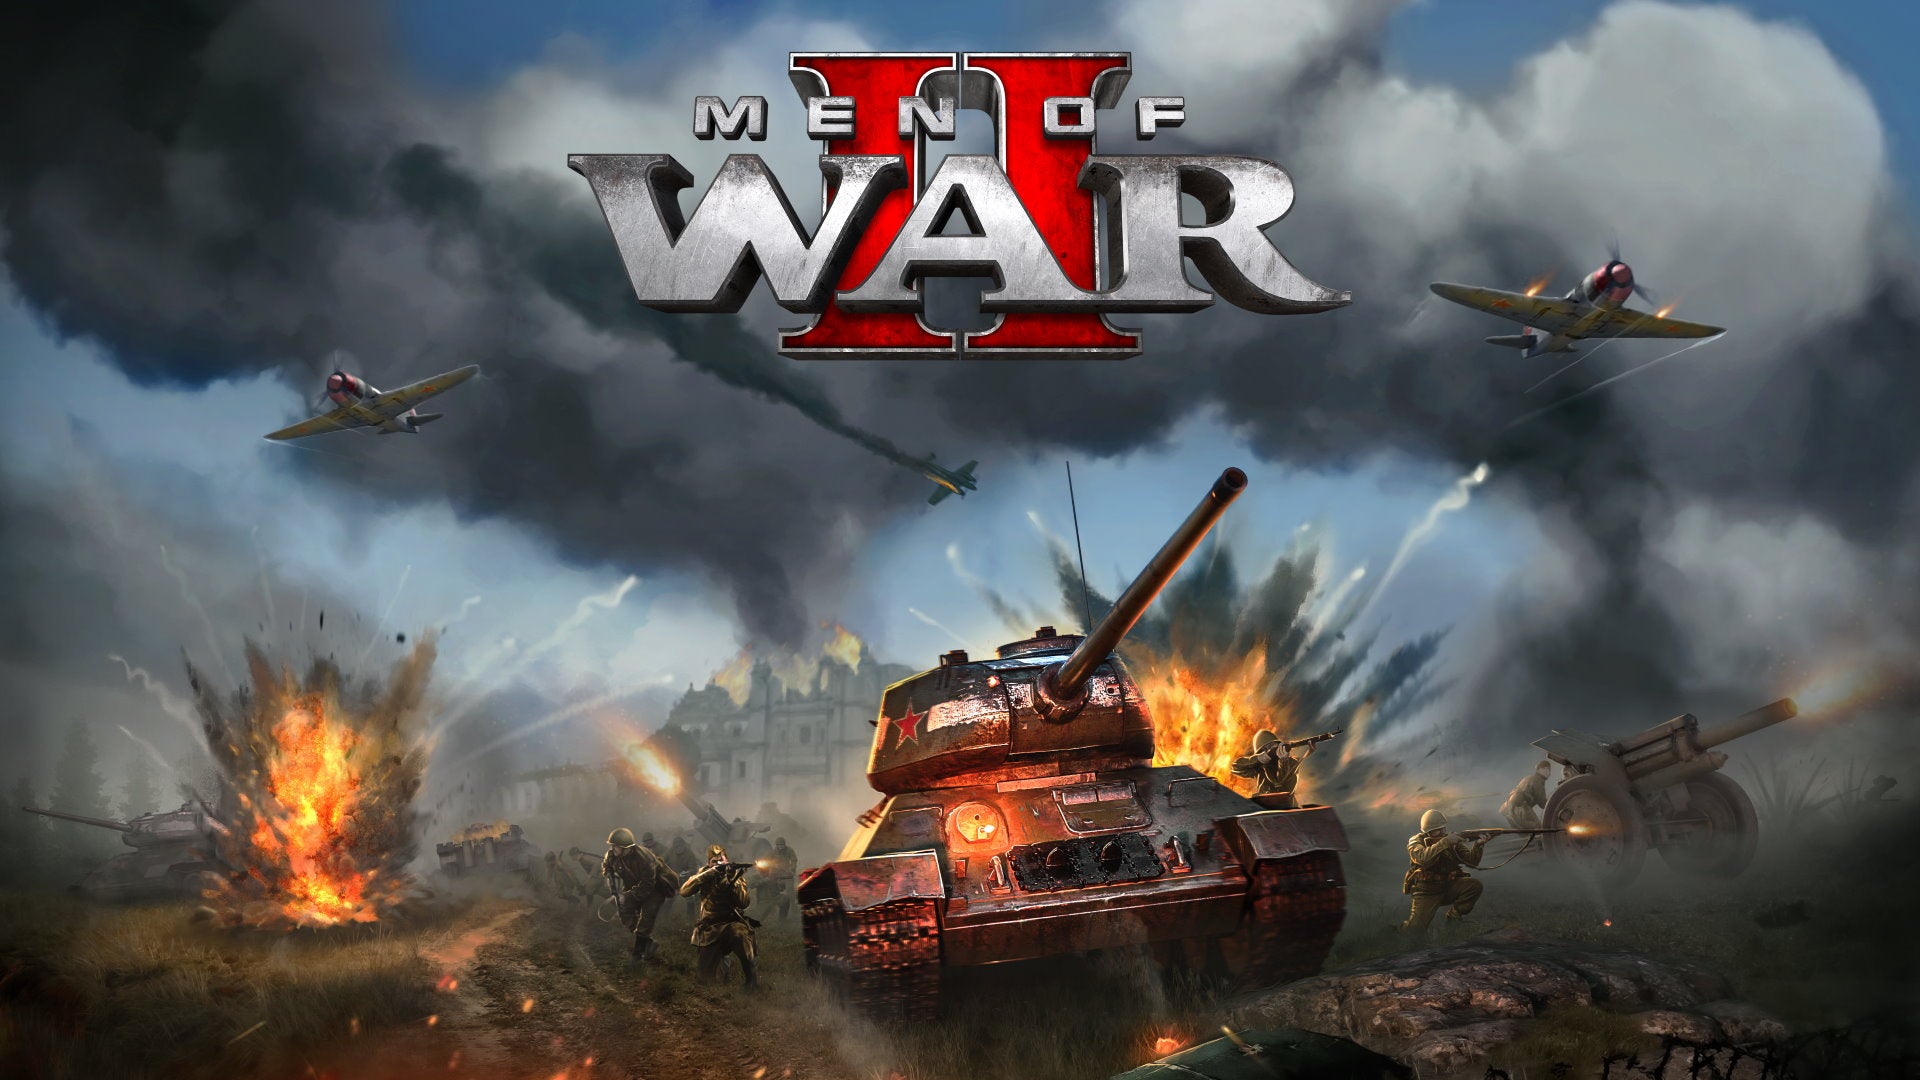 Artwork for Men of War II, showing tanks, planes and infantry soldiers in an explosive battlefield